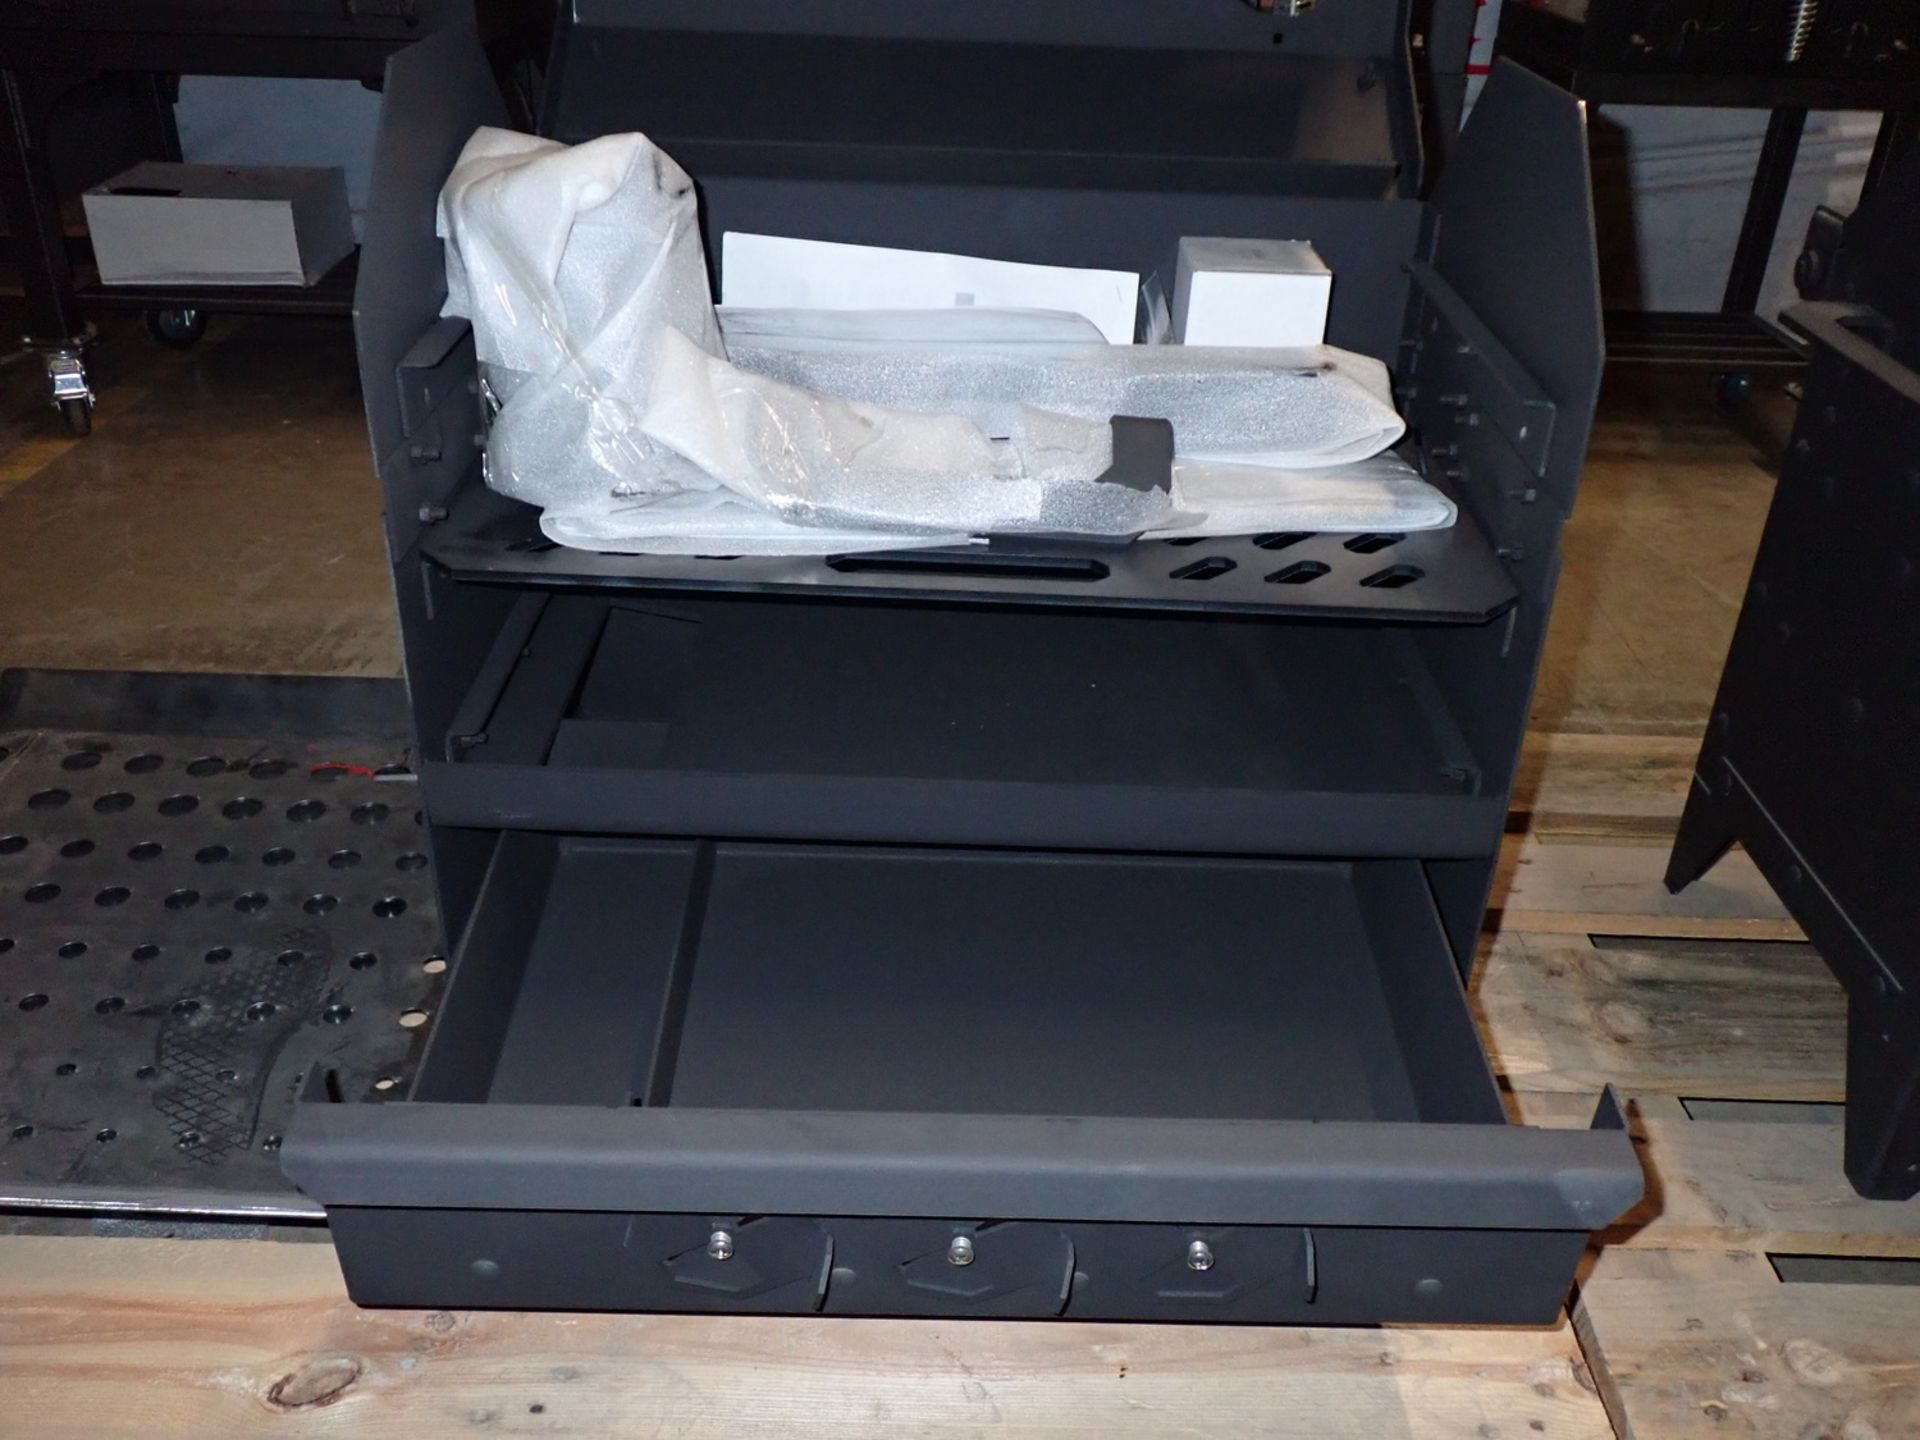 HAMRFORGE OLD IRON SIDES BBQ SMOKER (NOT ASSEMBLED) (MSRP $1,800) (HAS SCRATCHES & MARKINGS ON TOP) - Image 2 of 3